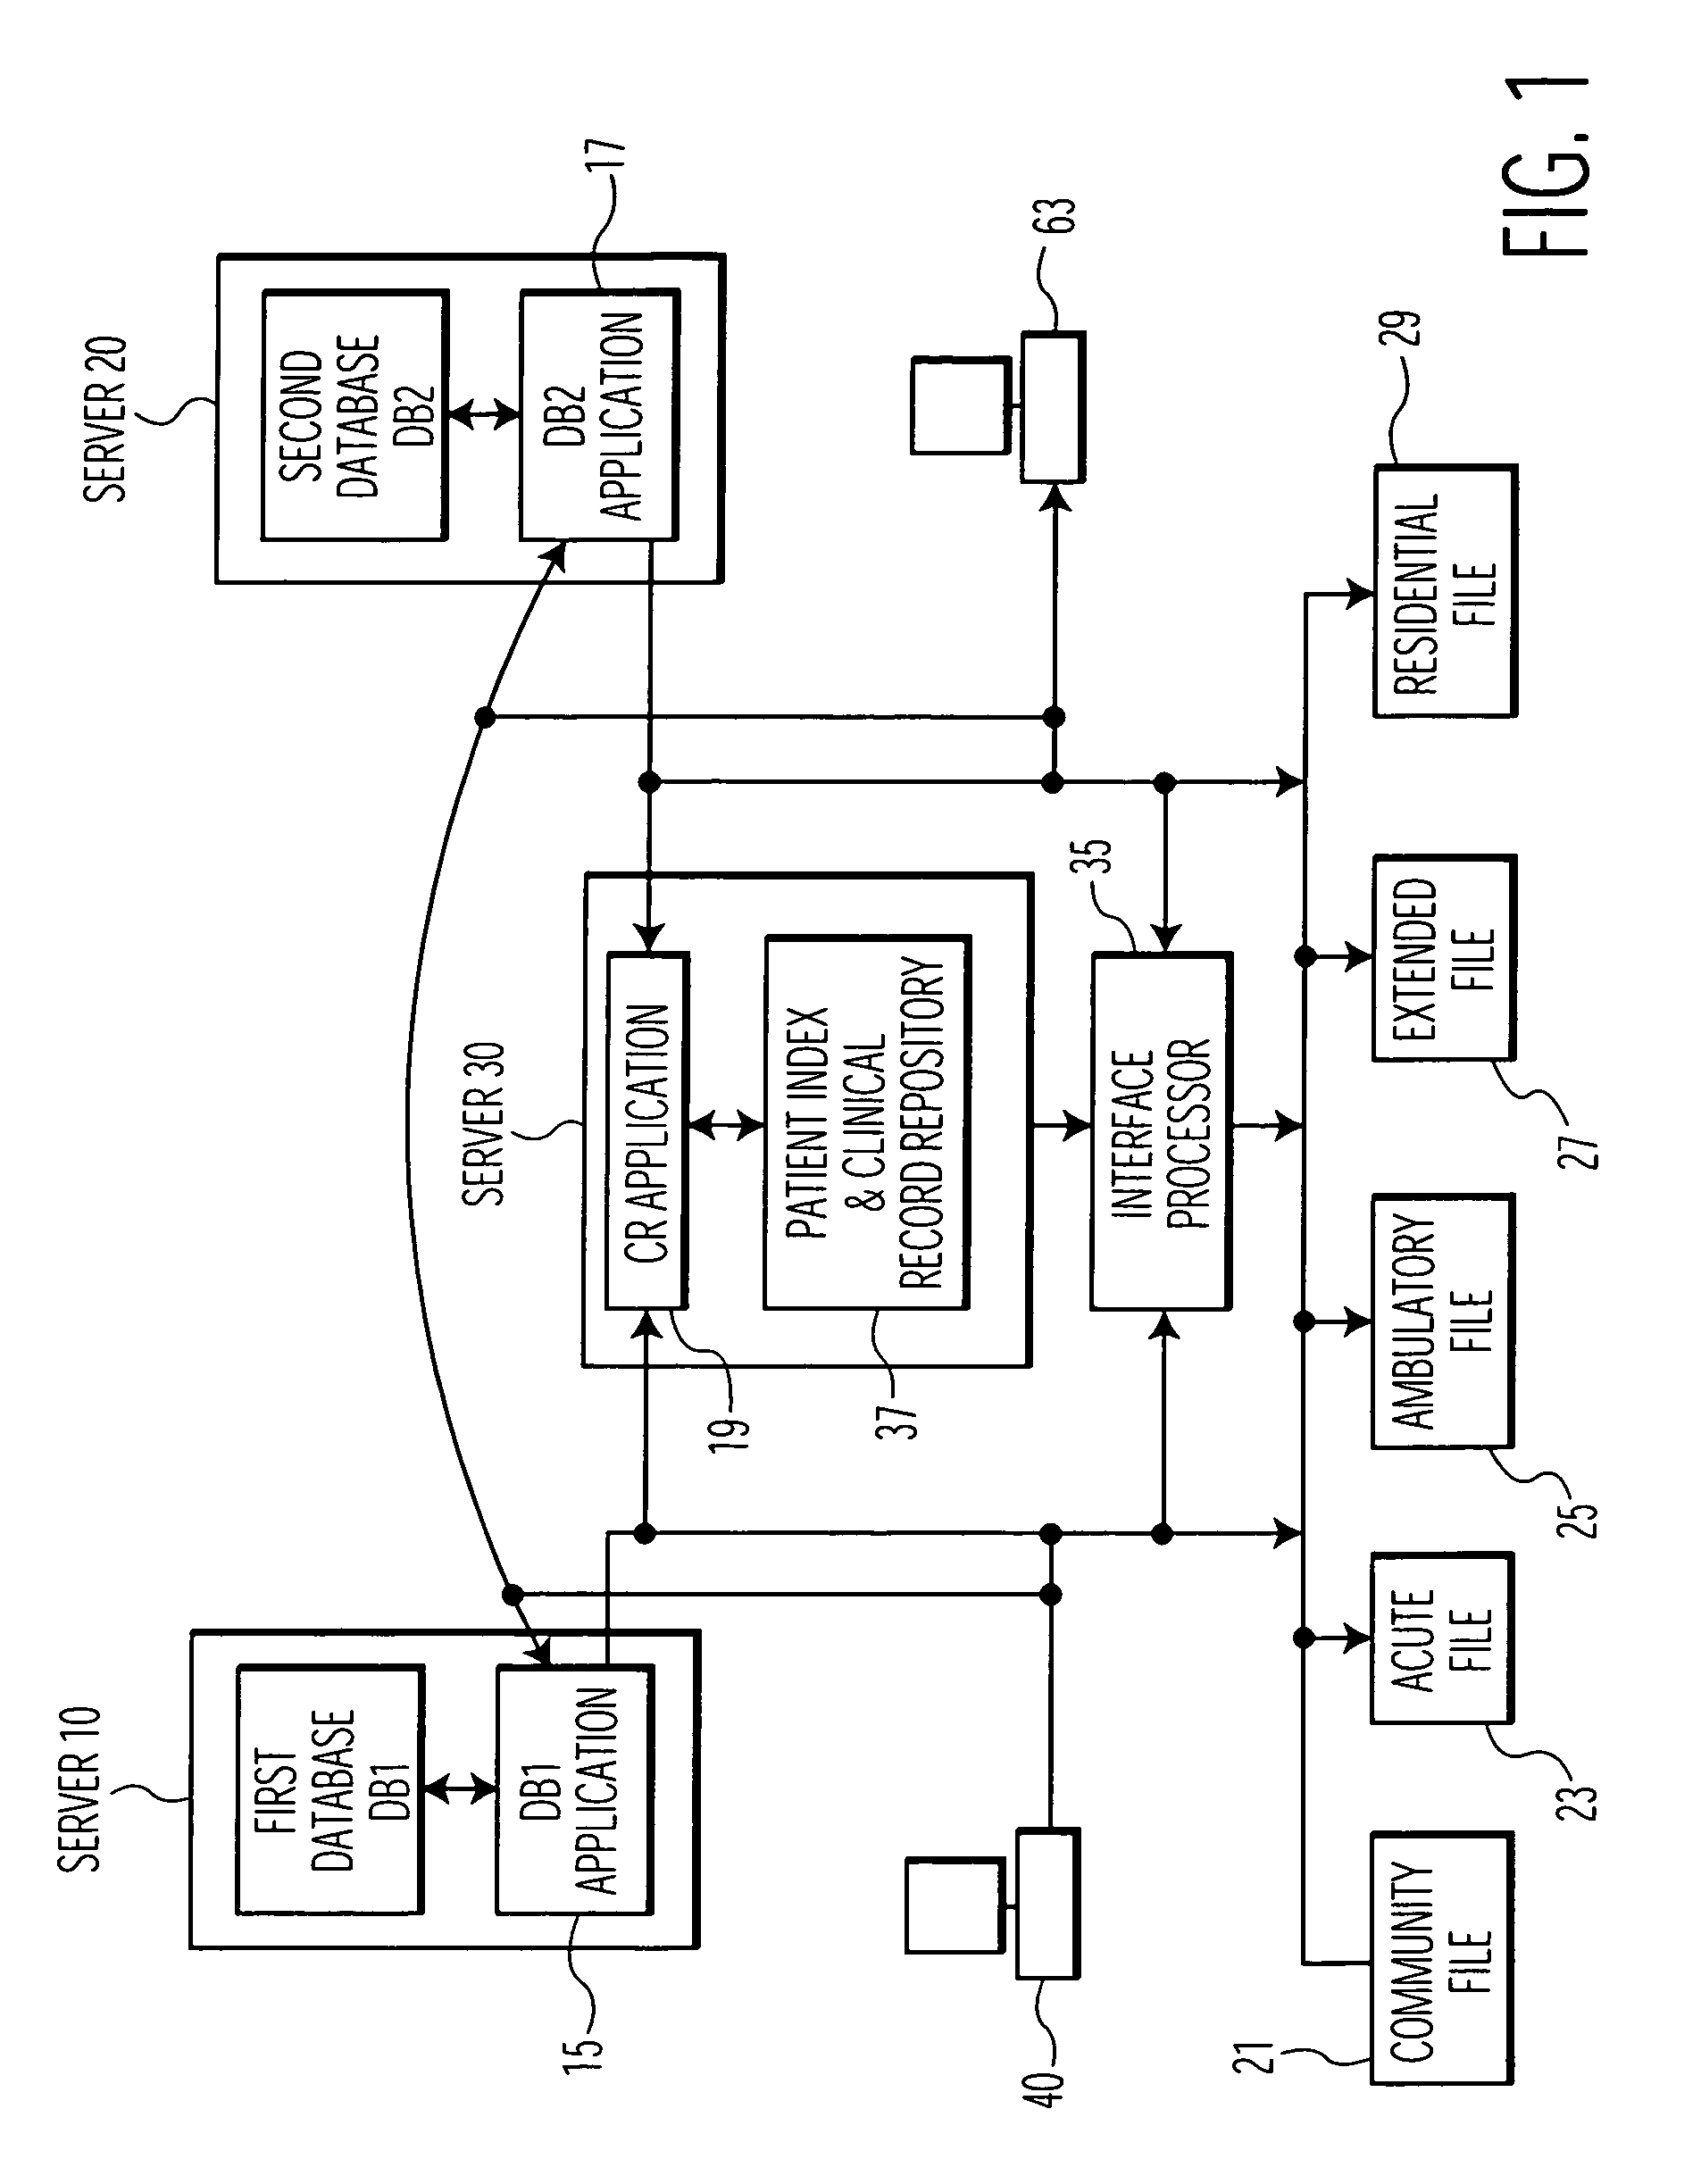 System for managing healthcare related information supporting operation of a healthcare enterprise